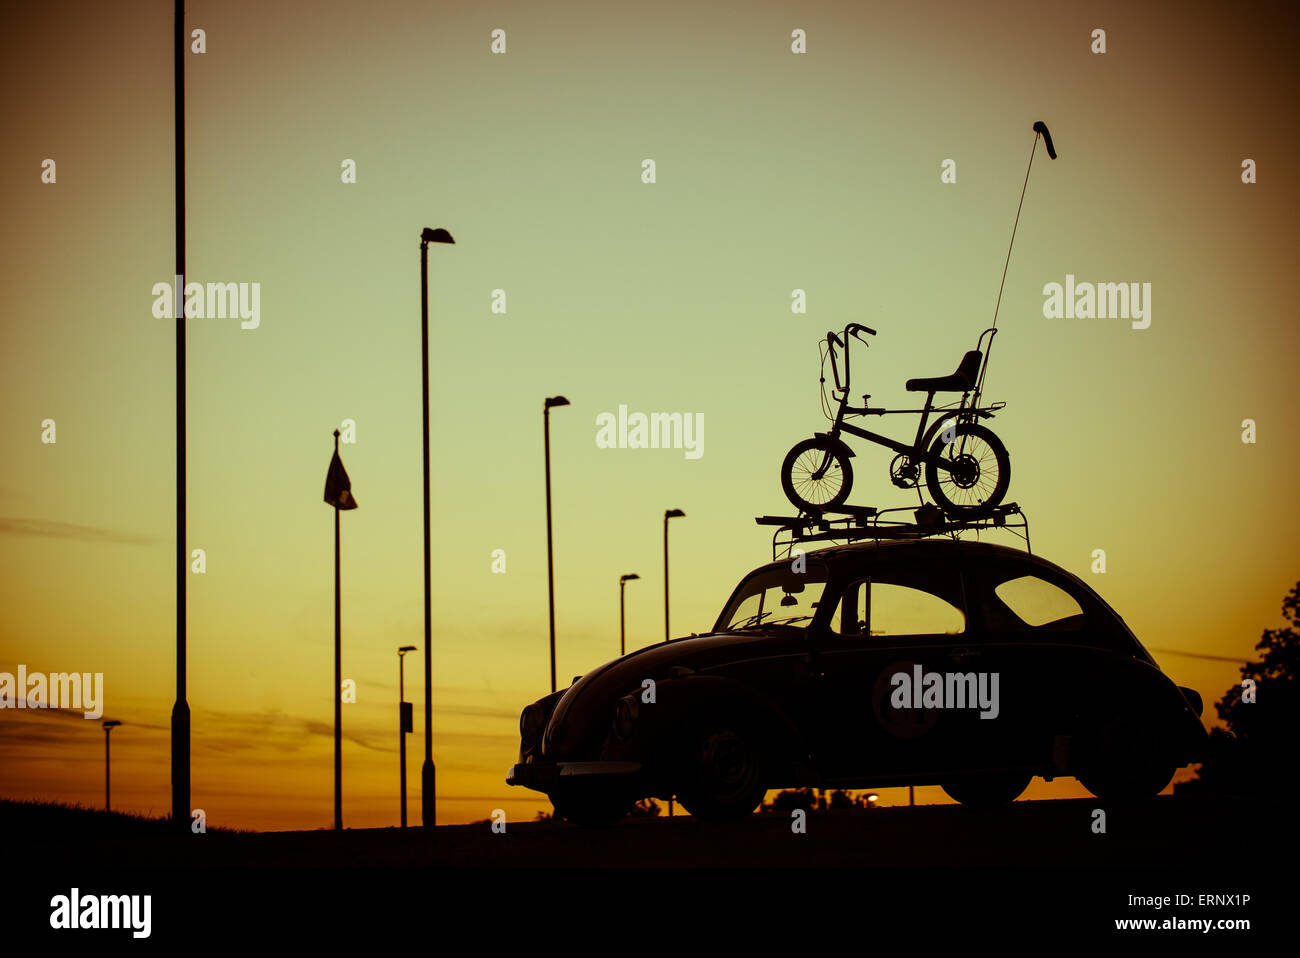 Iconic 1970s silhouettes of a Raleigh Chopper and Volkswagen Beetle against a sunset backdrop. Stock Photo